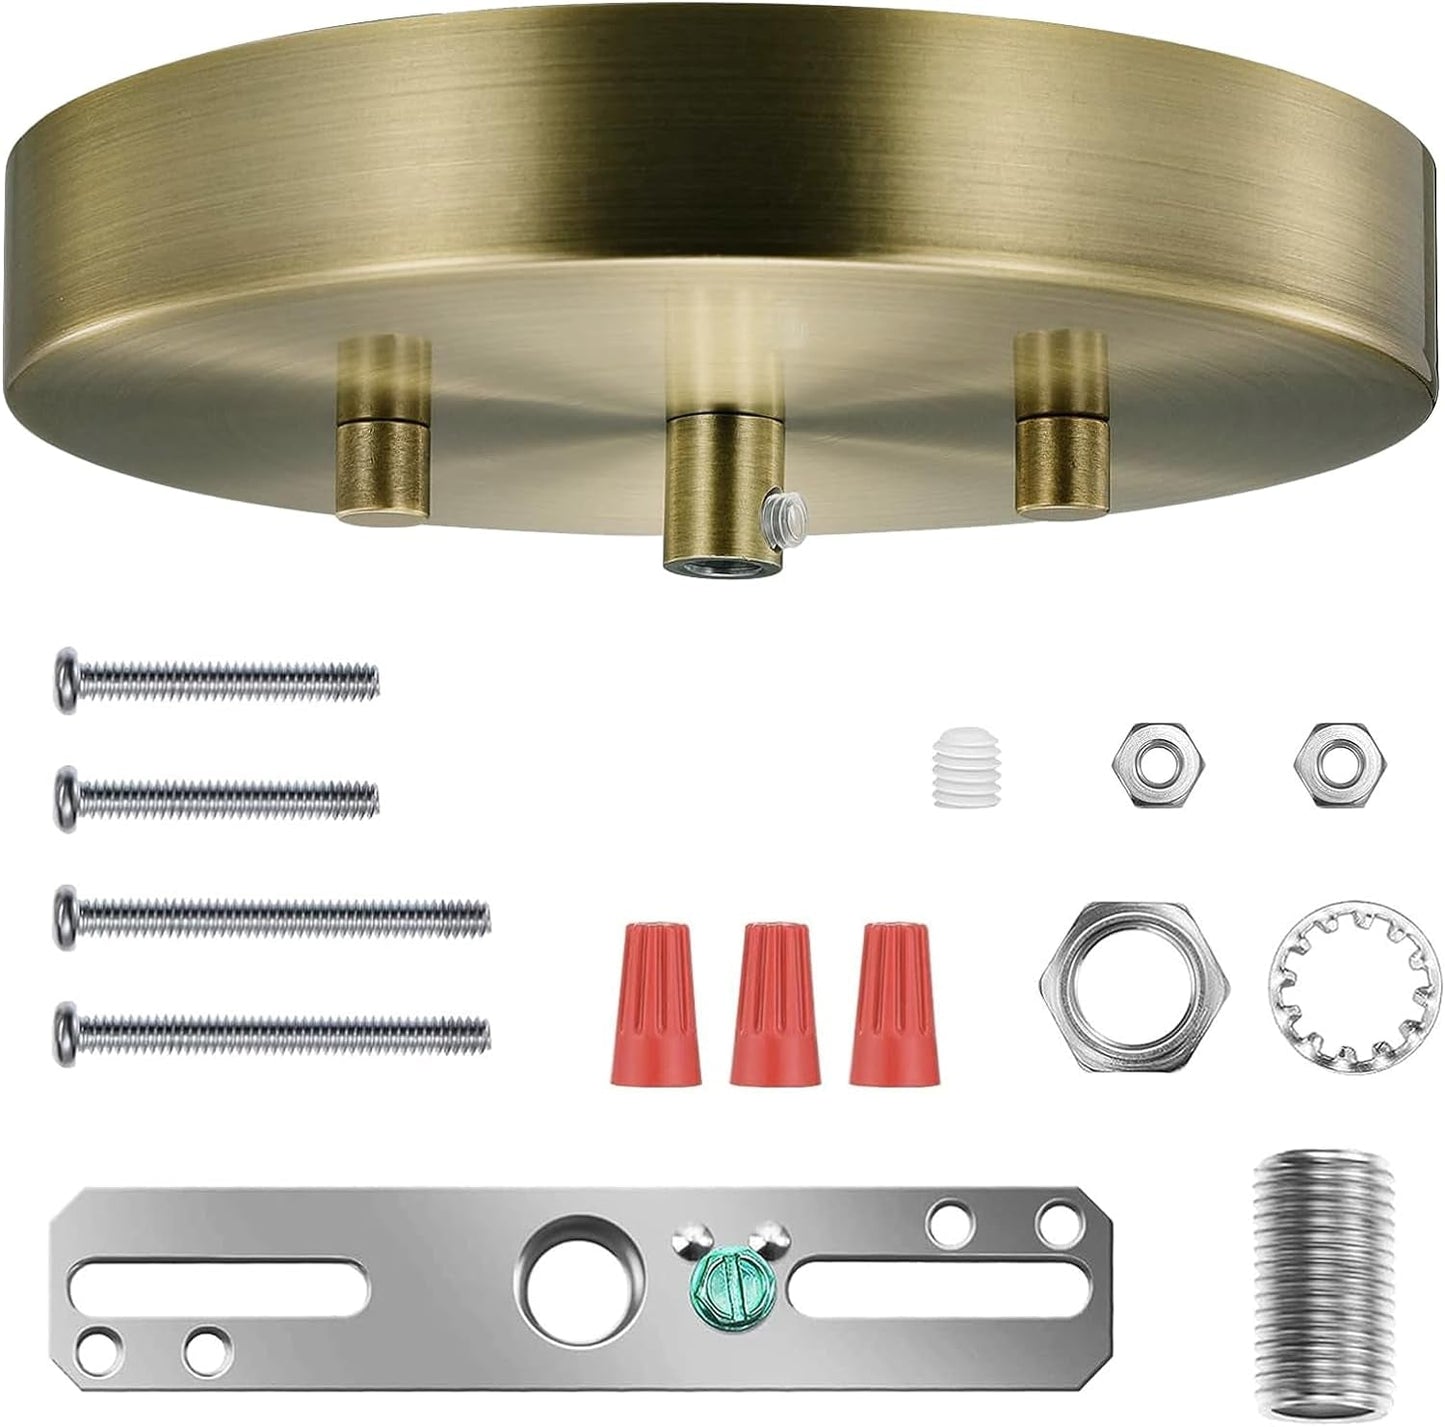 5.4'' Light Canopy Kit with Heavy Duty, Replacement Cover Plate with Mounting Hardware for Chandelier, Pendant Light, Swag Light, Ceiling Fan, Flower Basket or DIY Projects (Chrome)